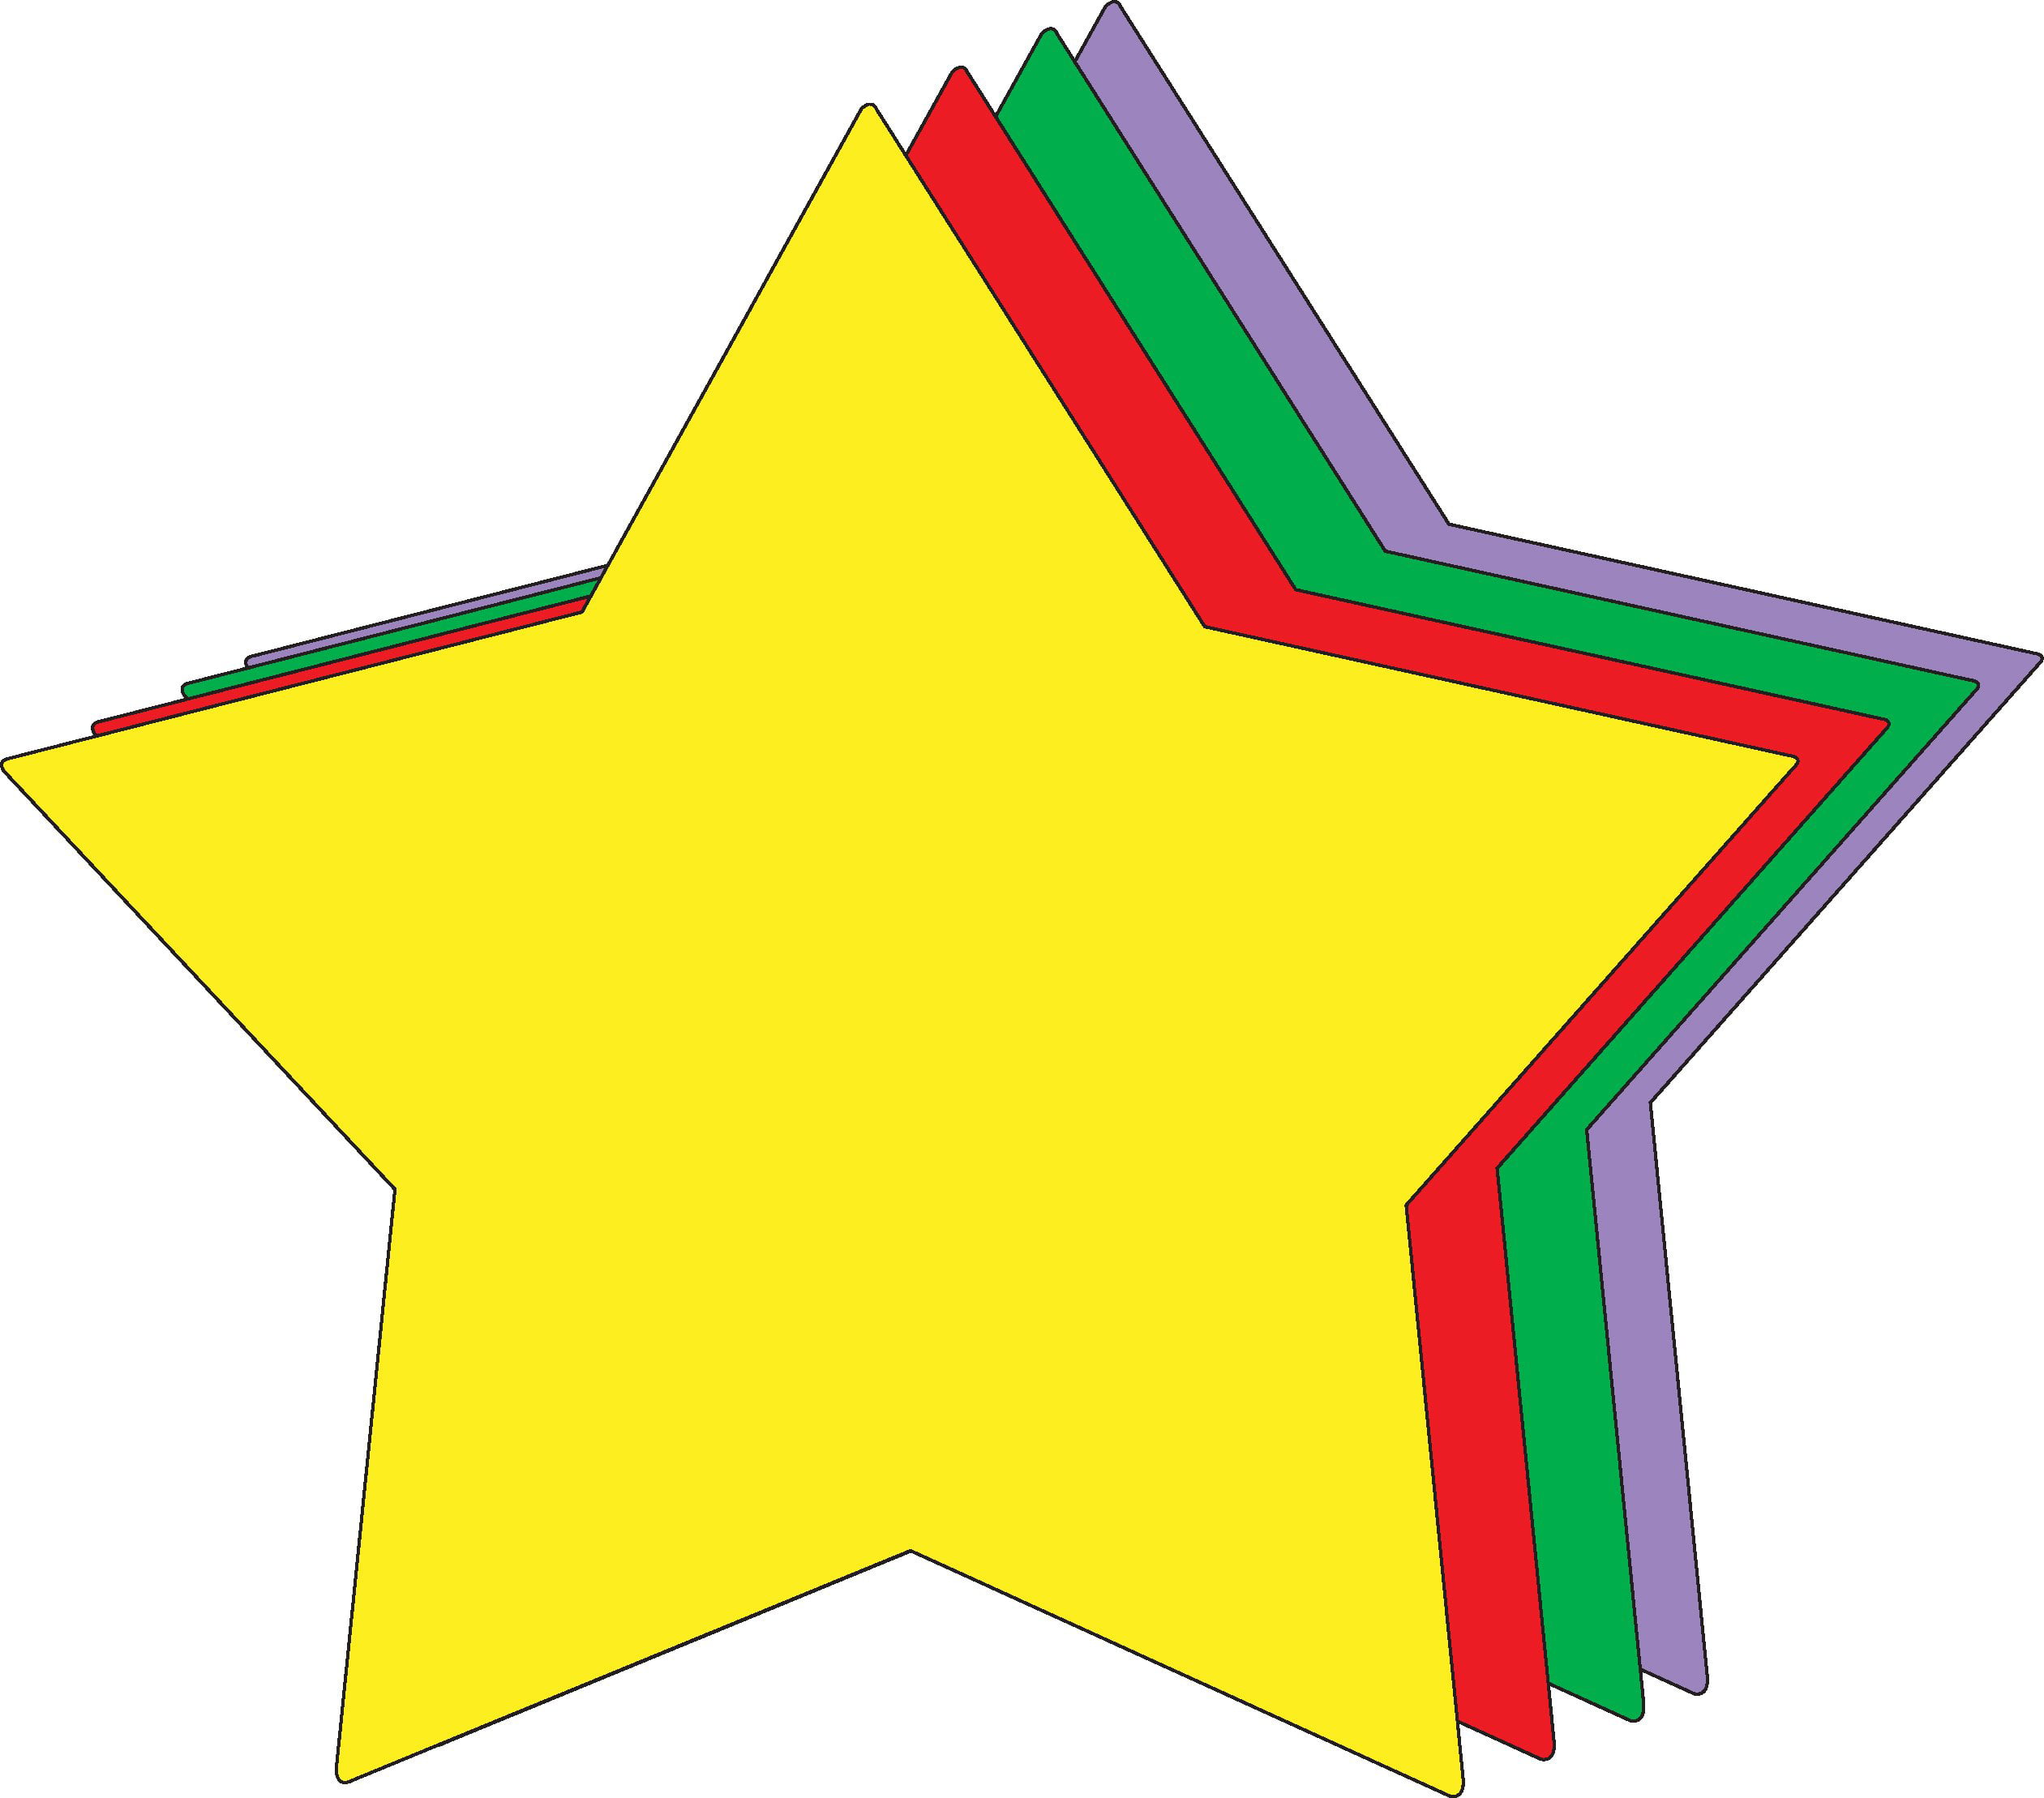 8/” x 10/” Star Single Color Super Cut-Outs 15 Cut-Outs in a Pack for Star Inspired Classroom//School Craft Projects.